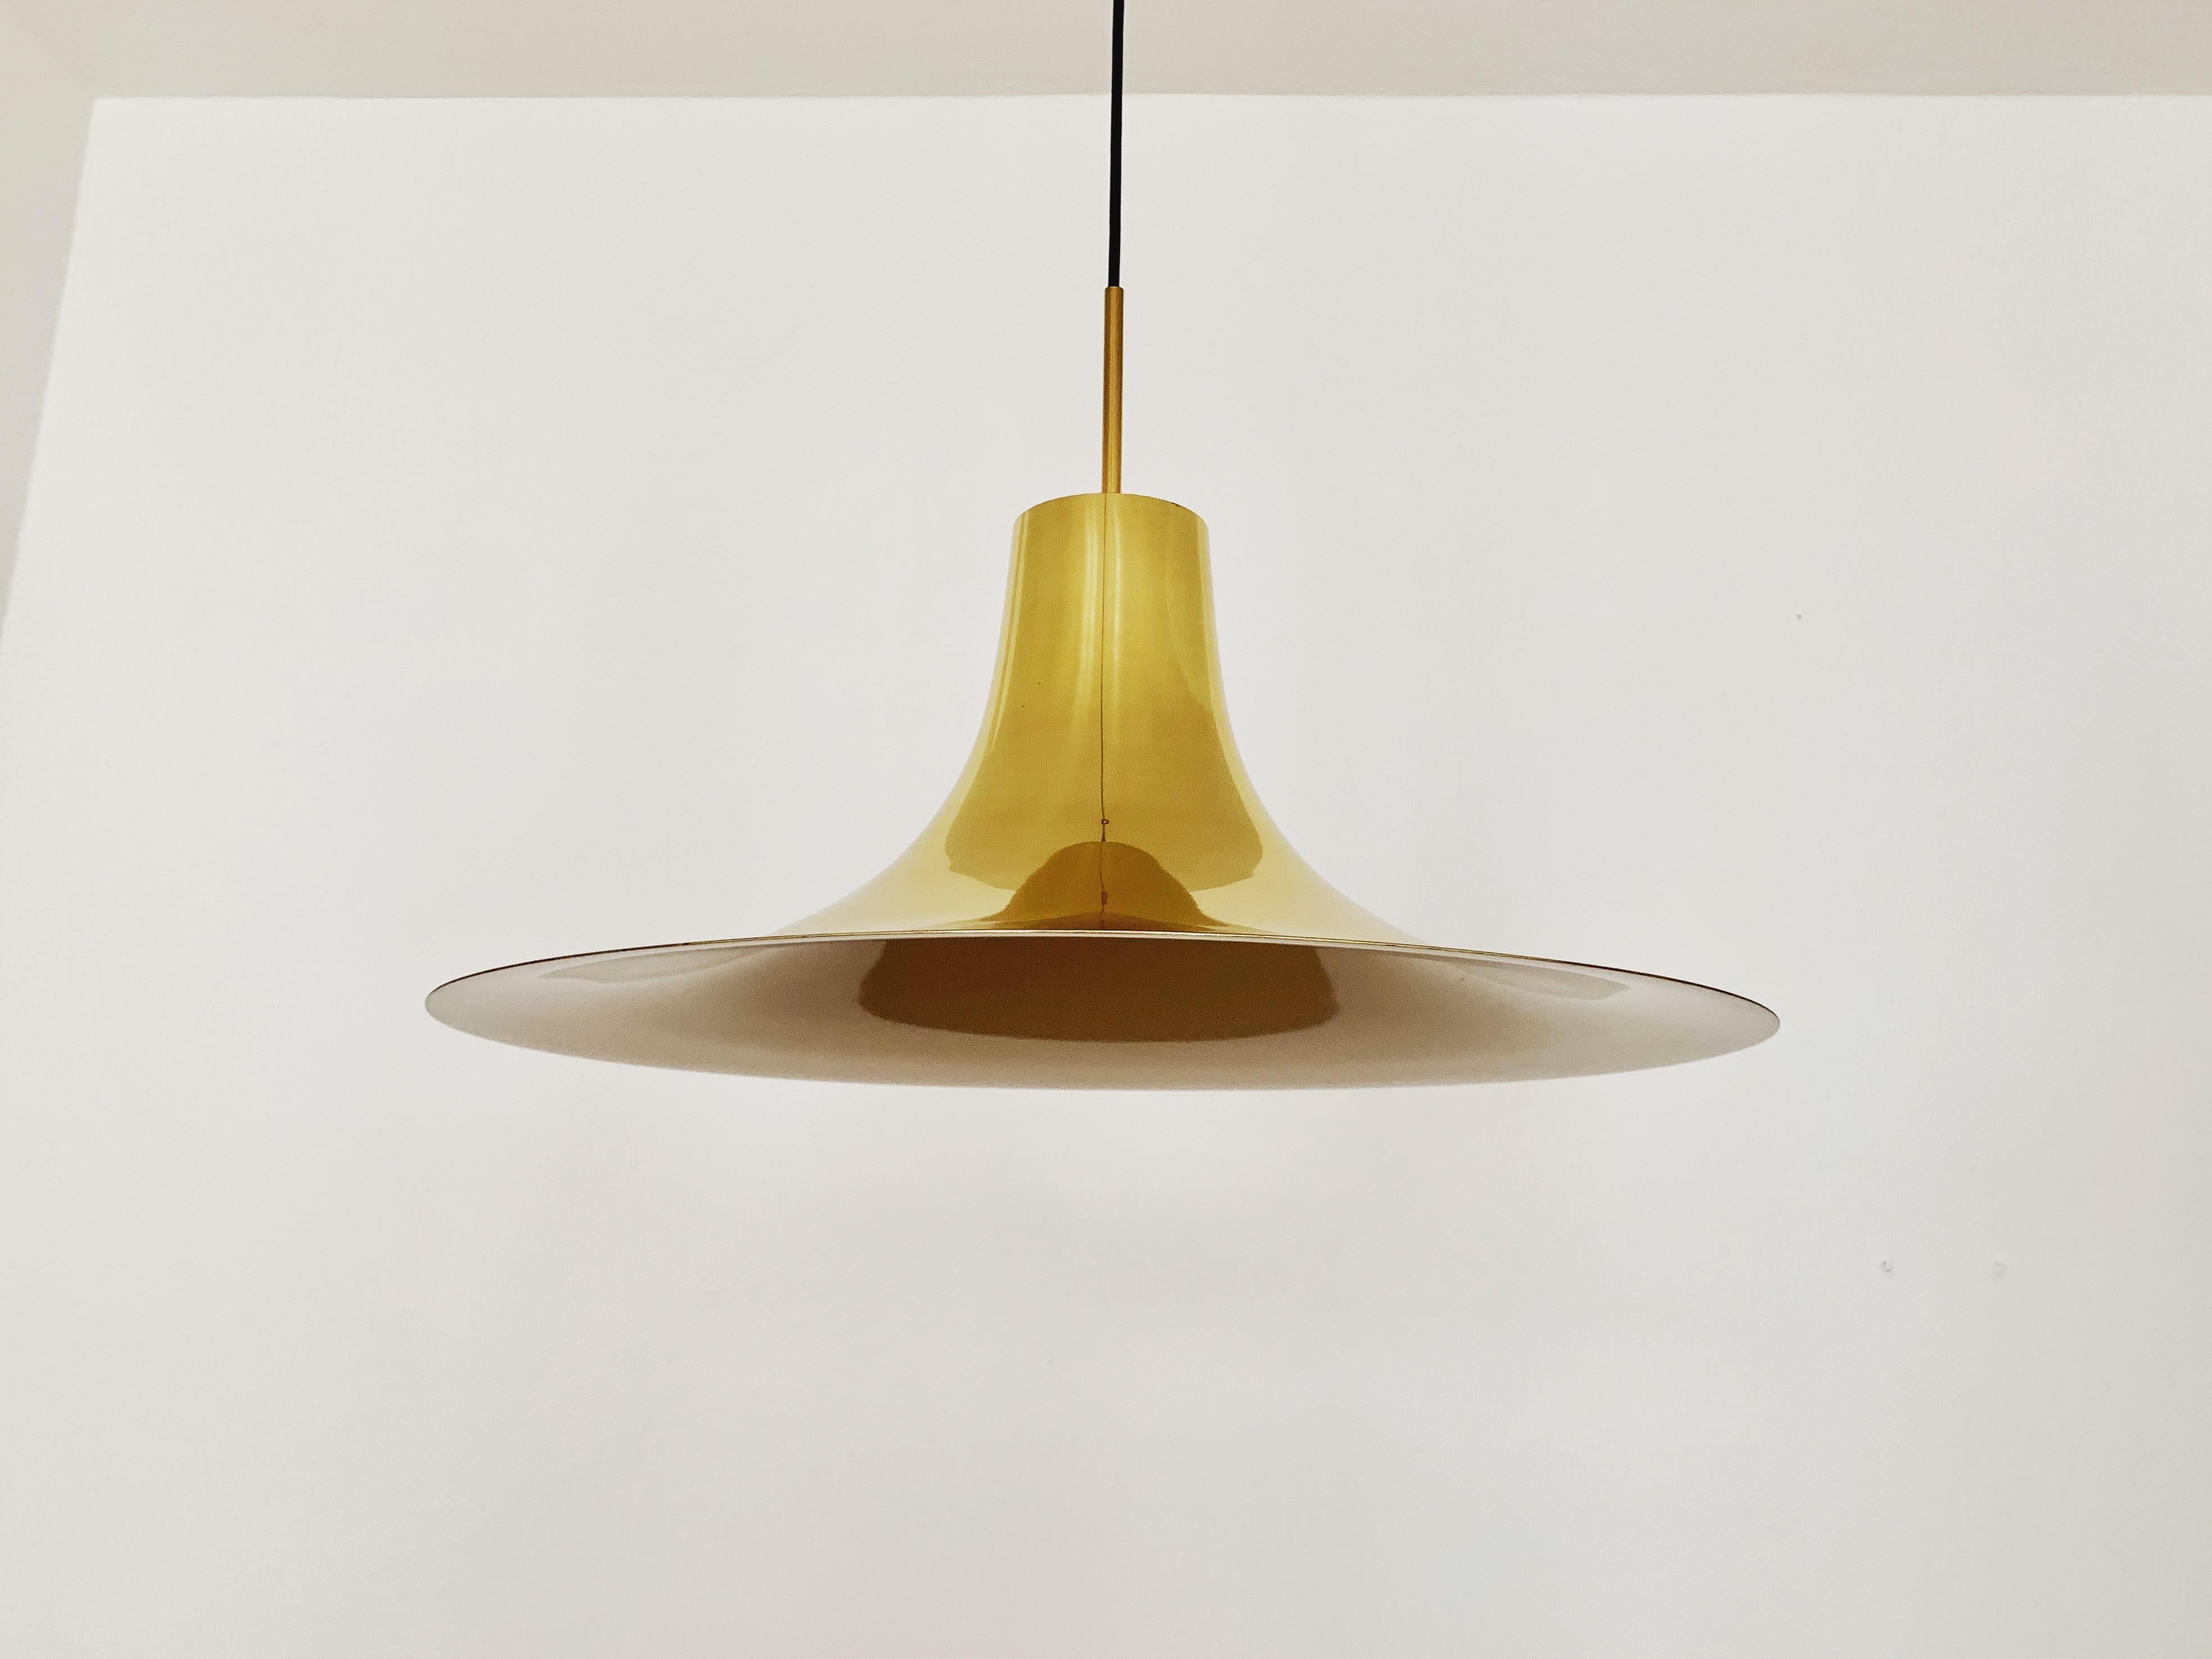 Very rare and large Danish pendant lamp from the 1960s.
The design based on a trumpet and the charisma of the lamp is particularly beautiful.
The shape creates a warm and pleasant light.
A real eye-catcher and an enrichment for every